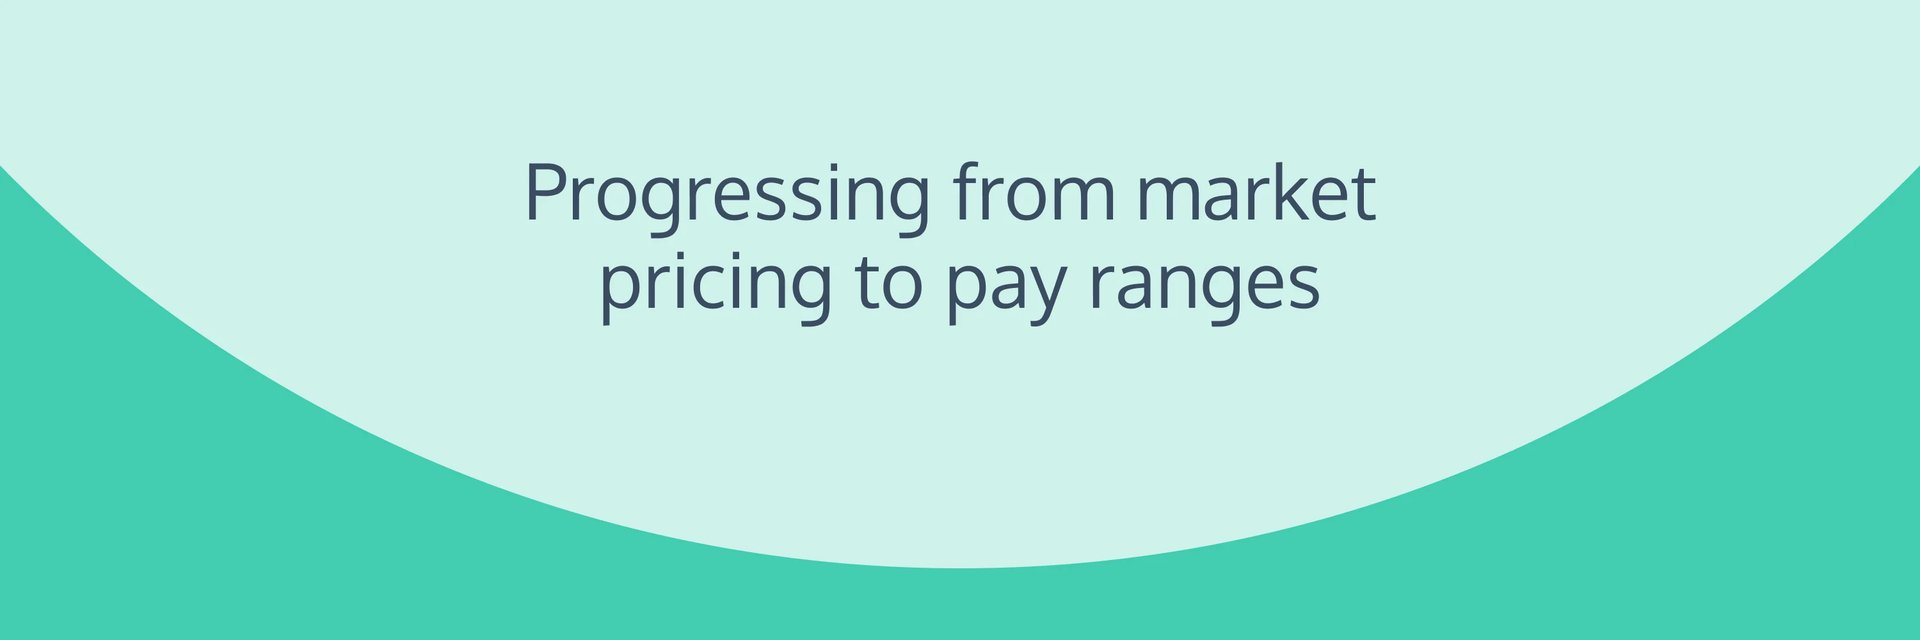 Progressing from market pricing to pay ranges